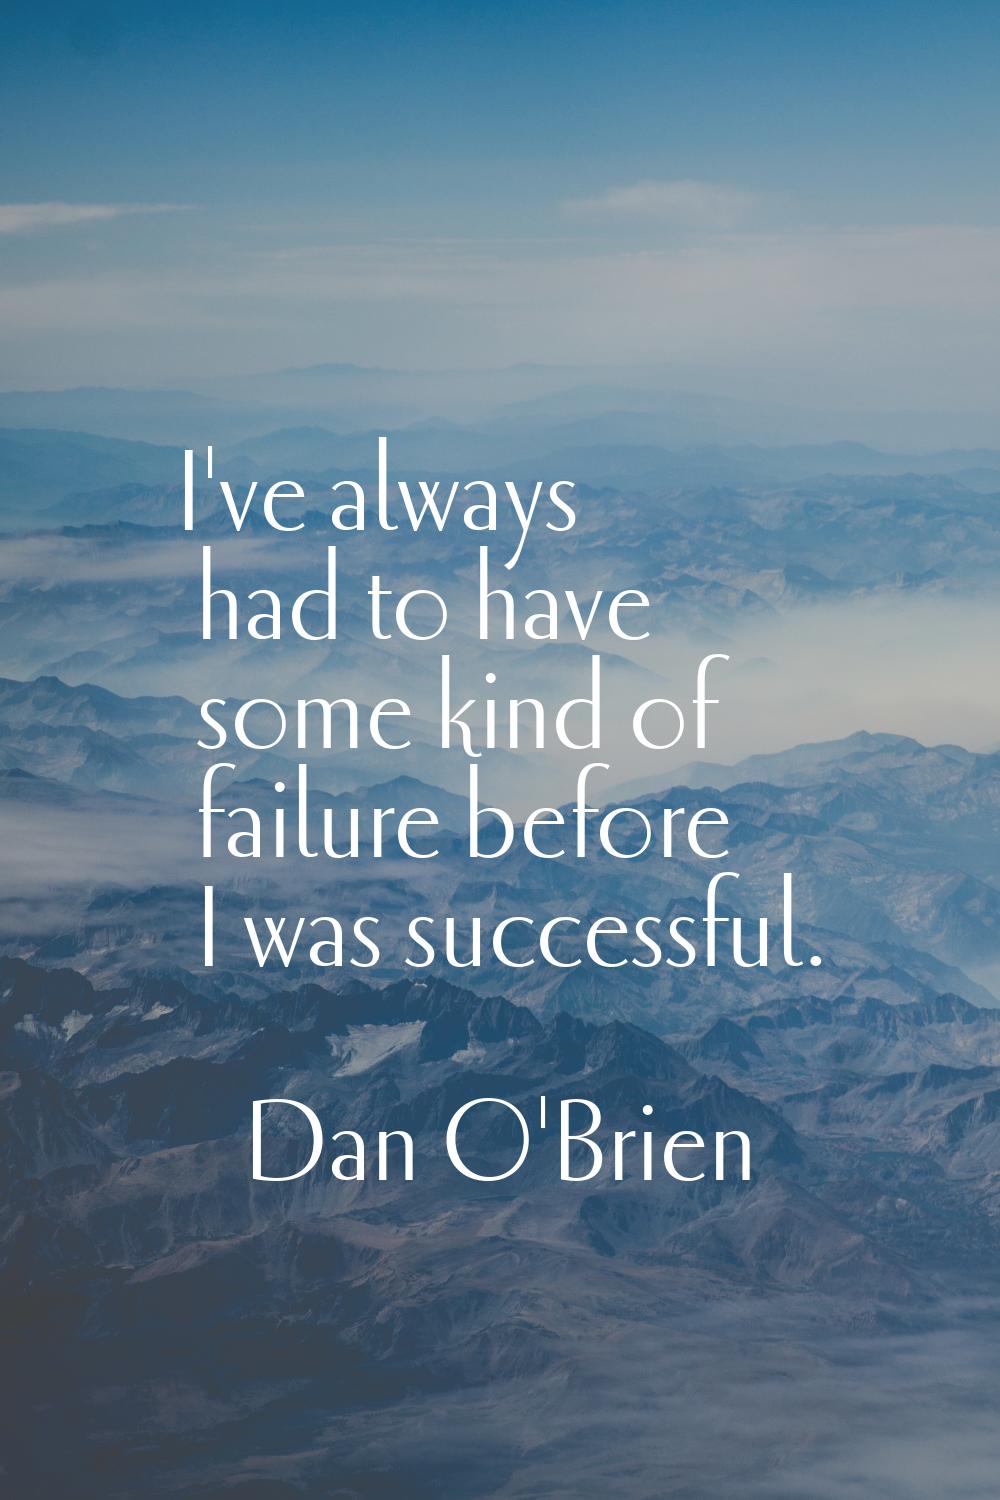 I've always had to have some kind of failure before I was successful.